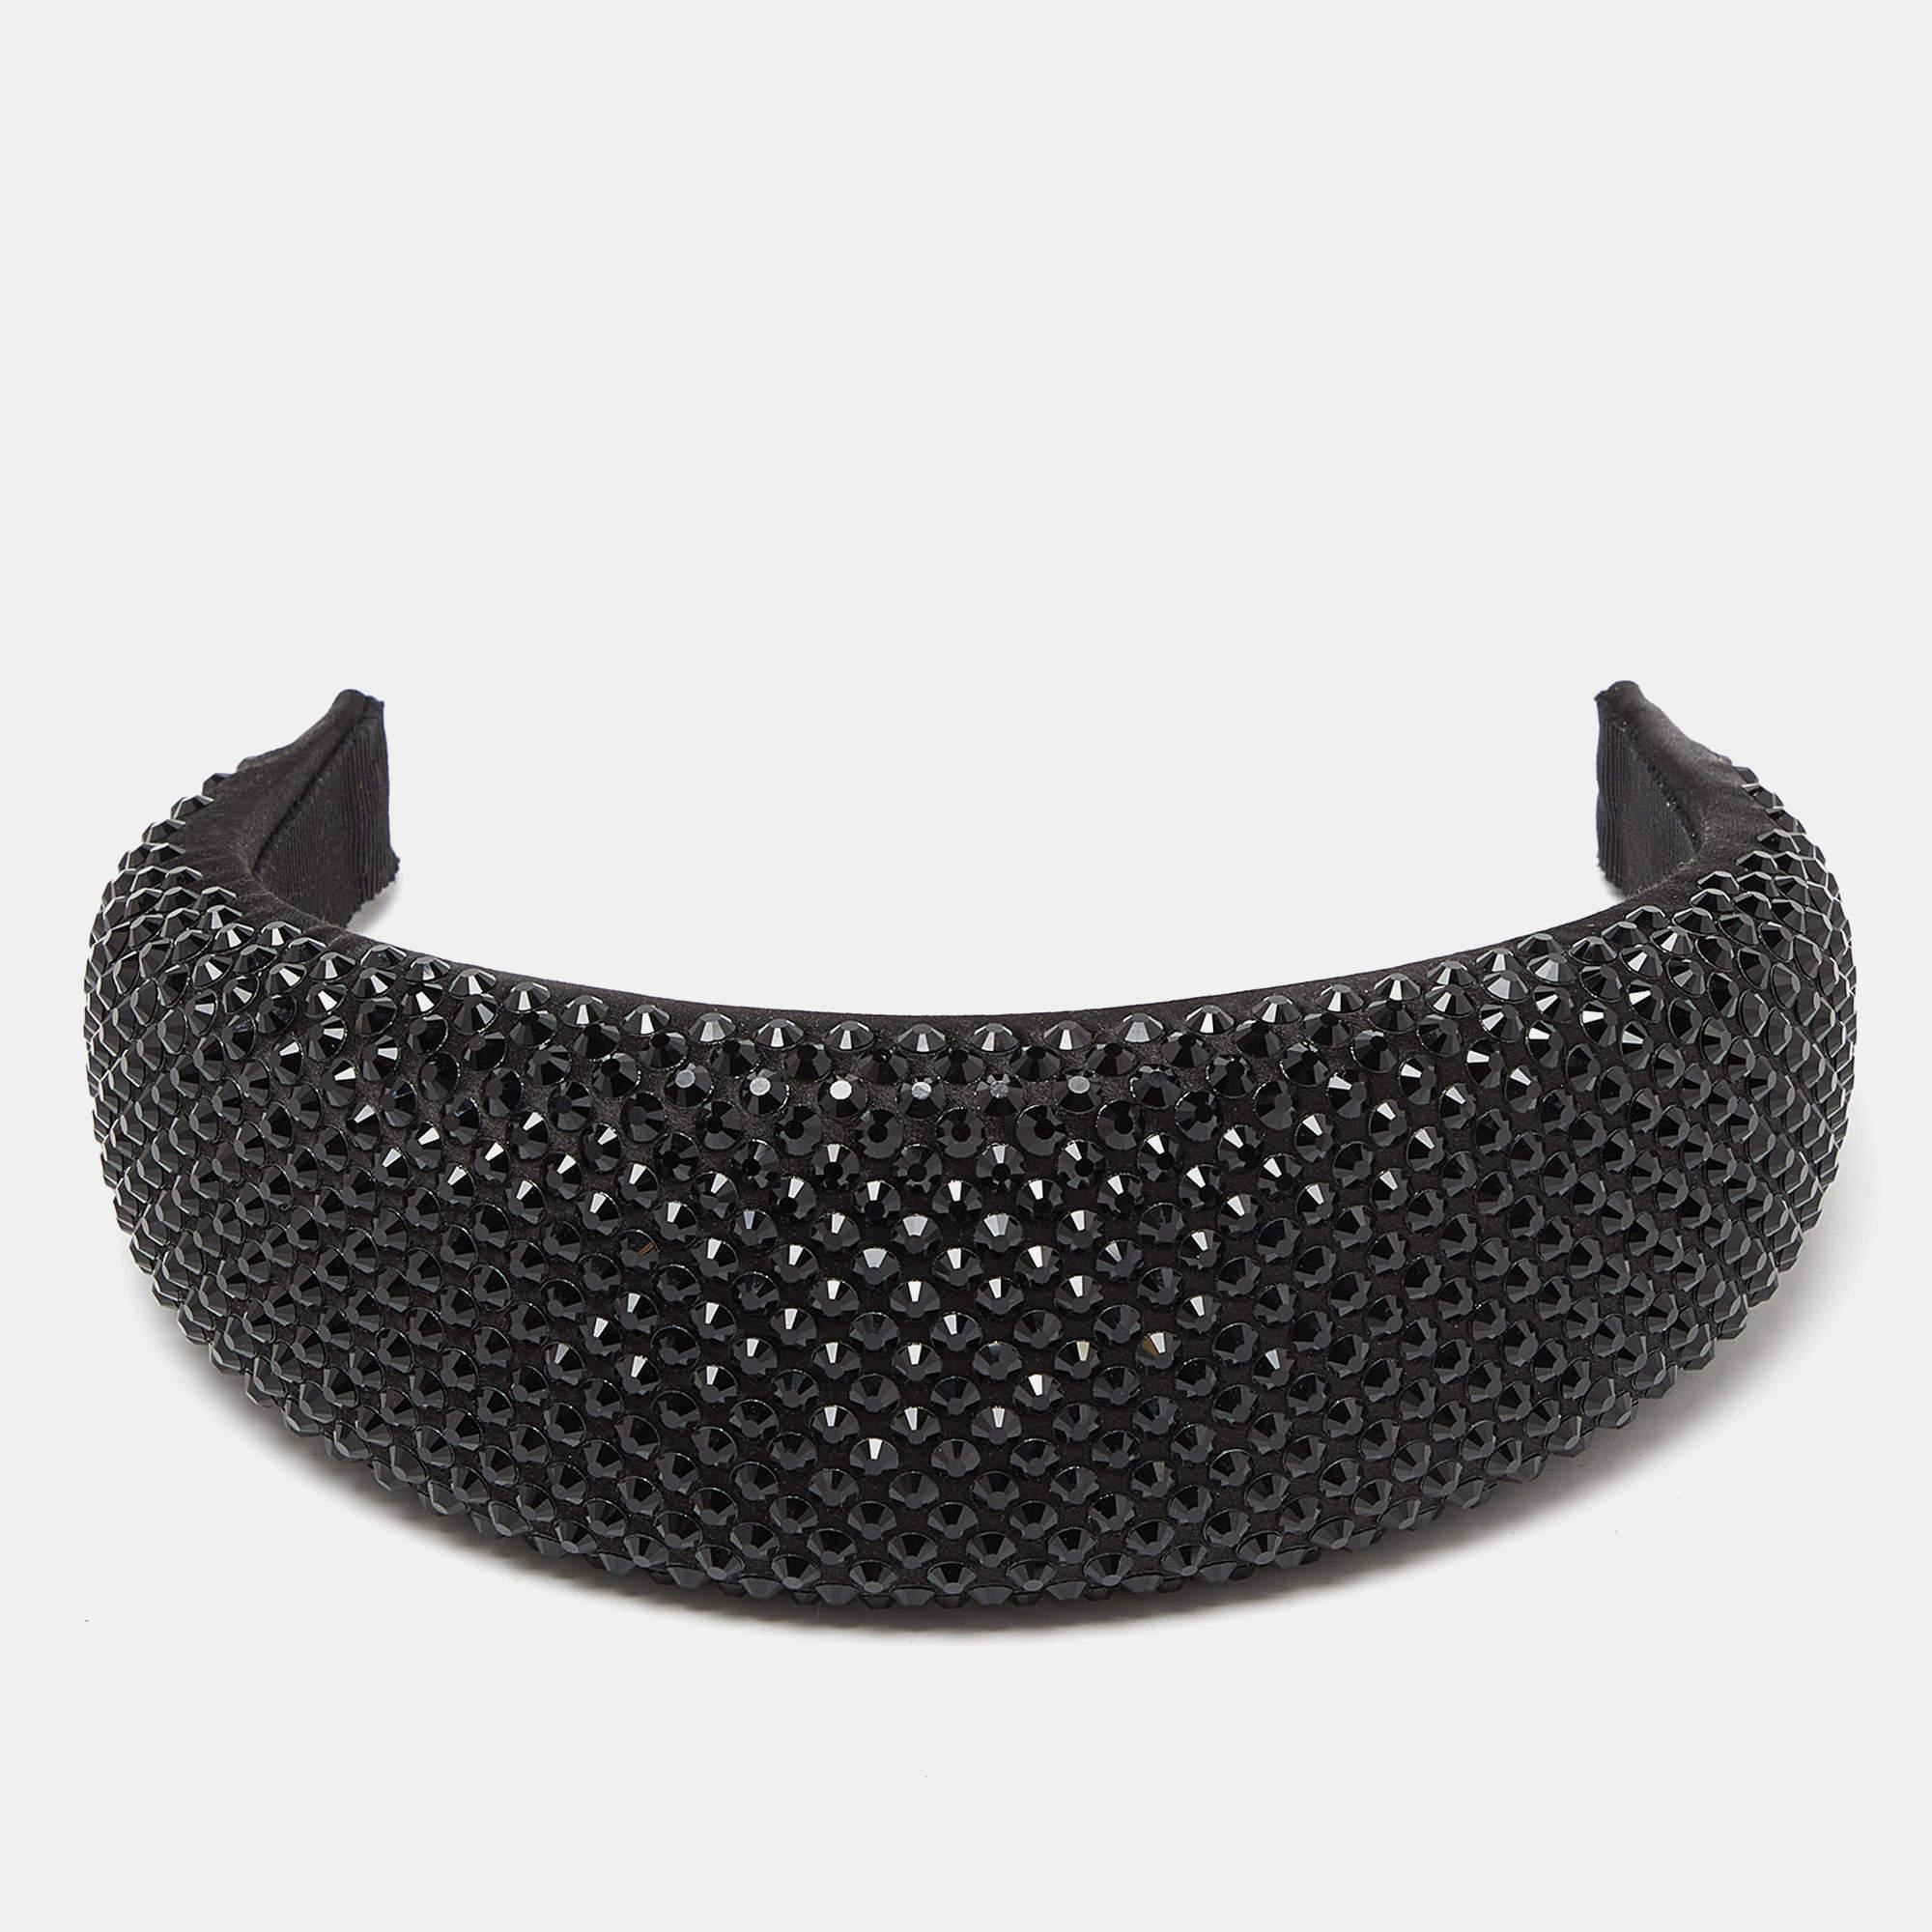 This pretty headband by Prada is a must-have accessory! Covered in black crystals, this headband is easy to put on and looks gorgeous with casual chic outfits as well as evening dresses.

Includes: Original Dustbag

